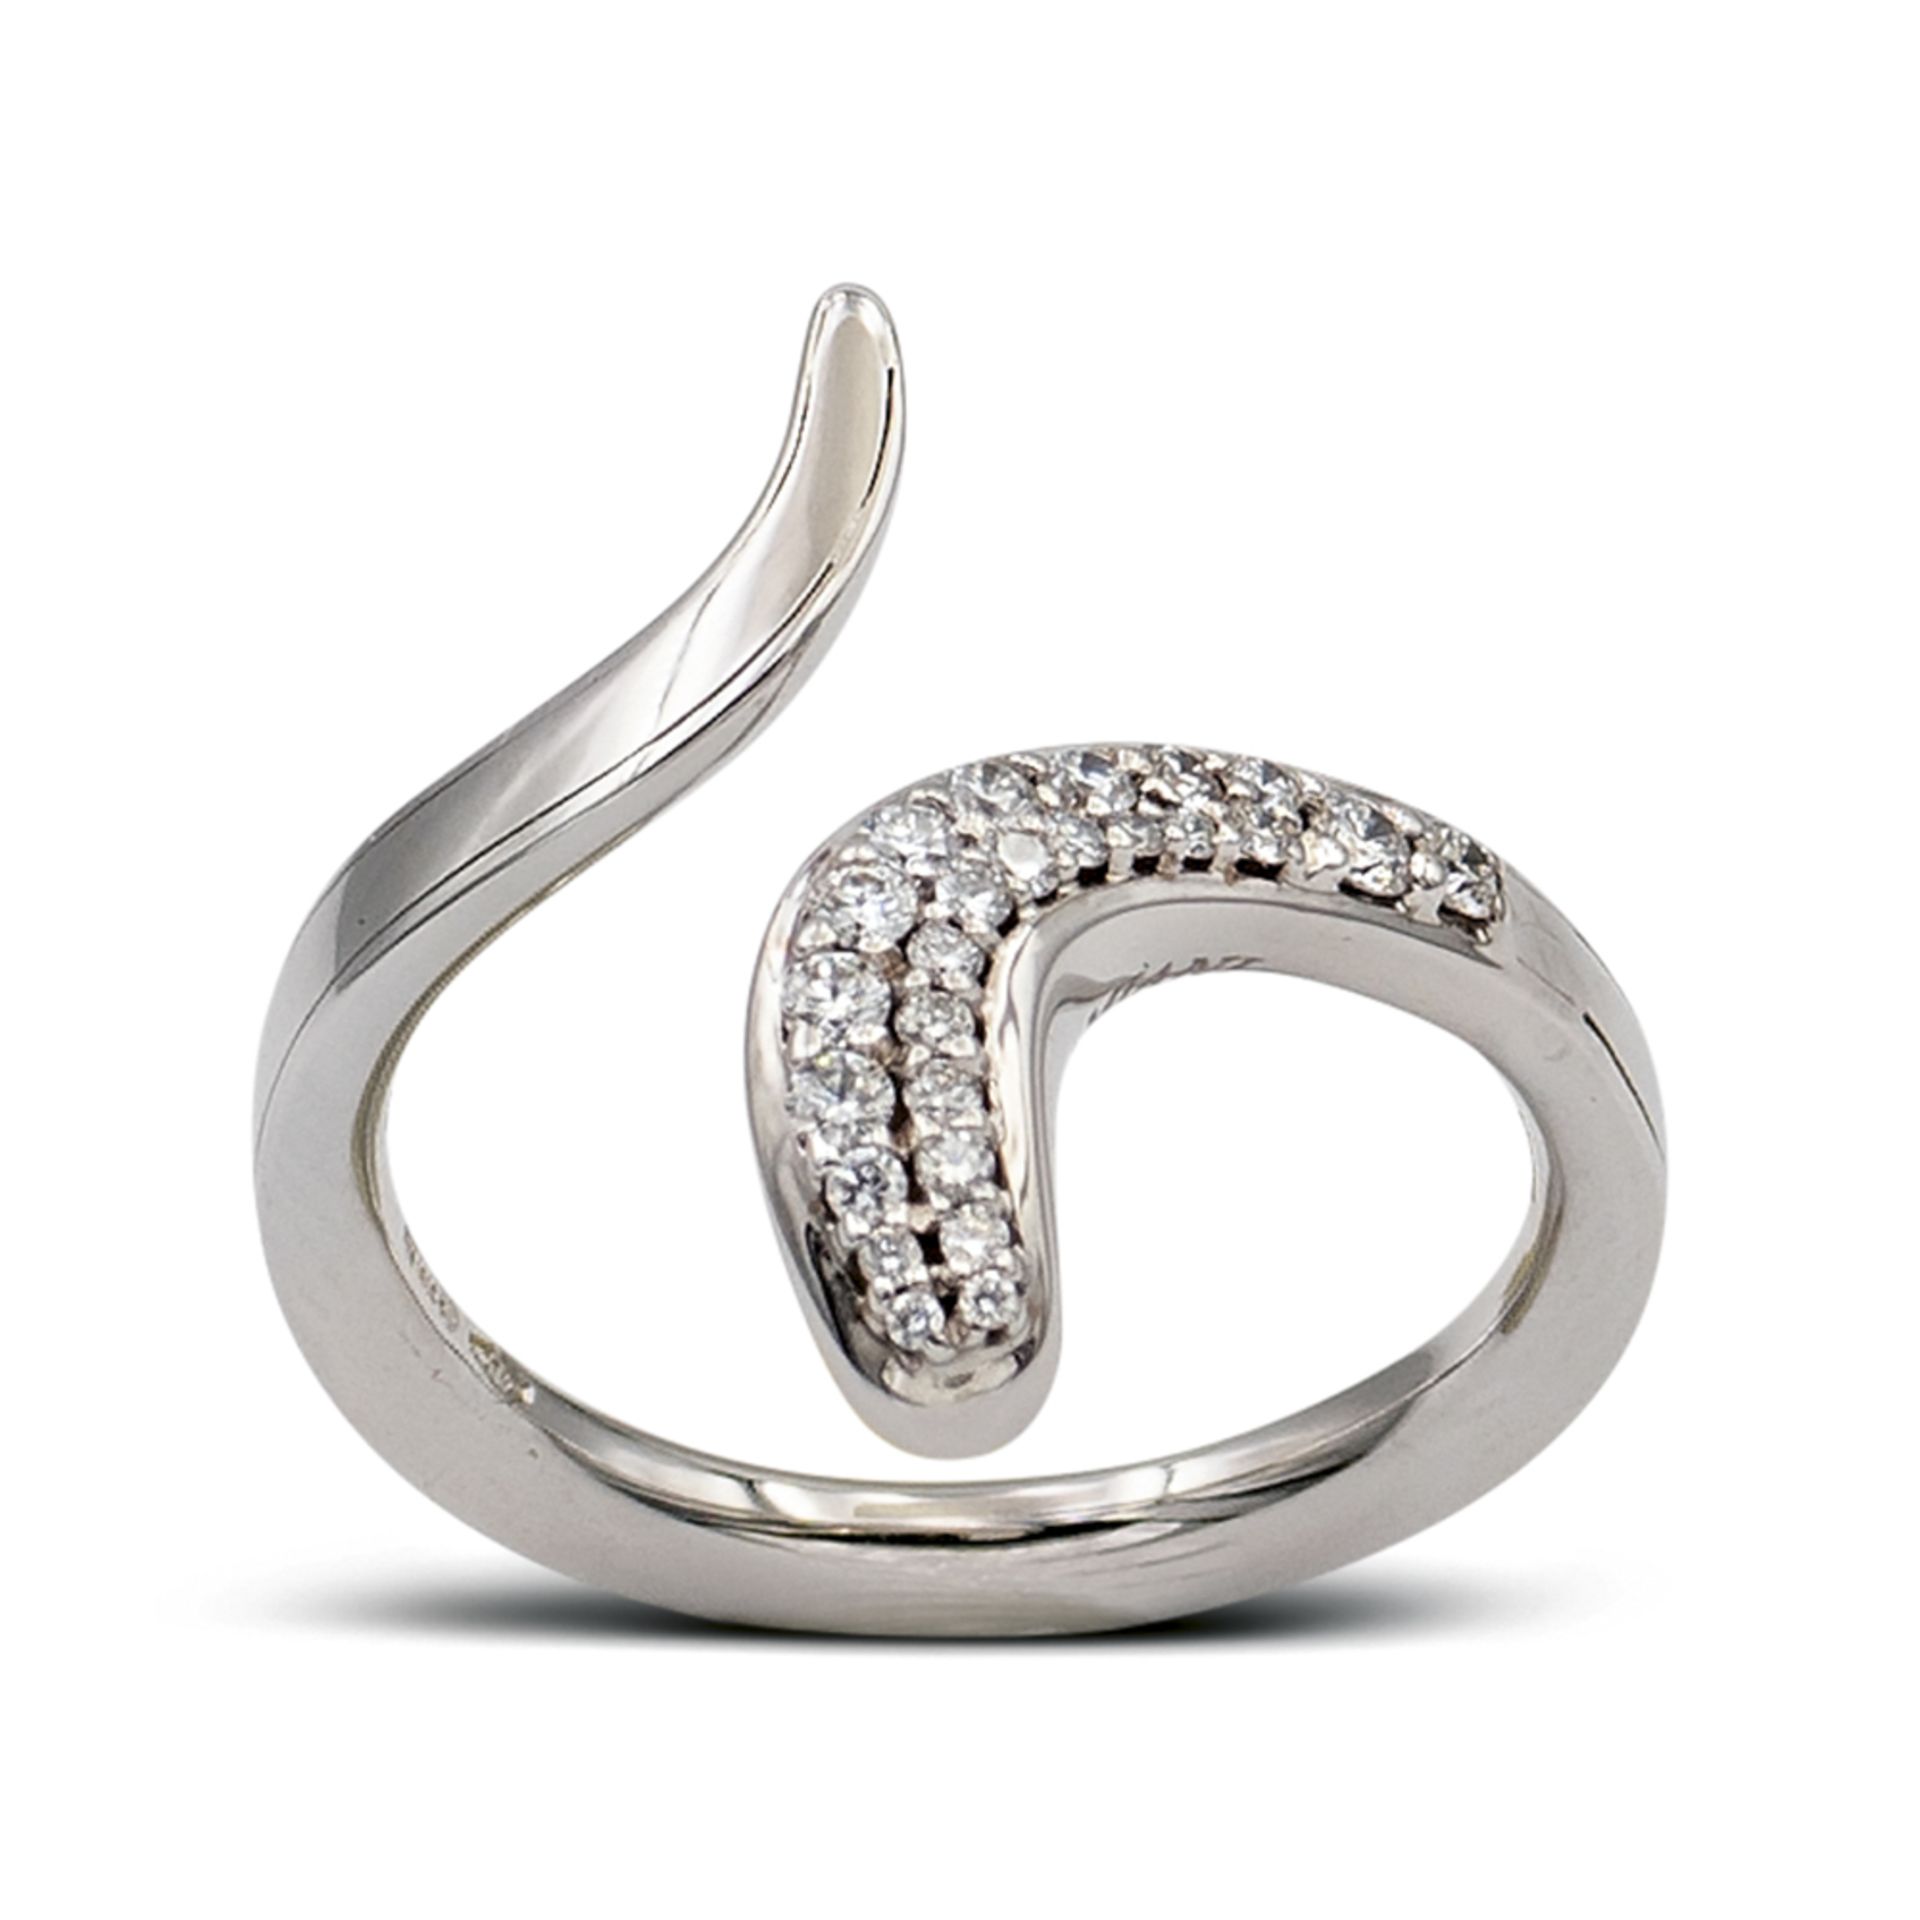 Damiani "Eden" collection ring weight 3,8 gr.